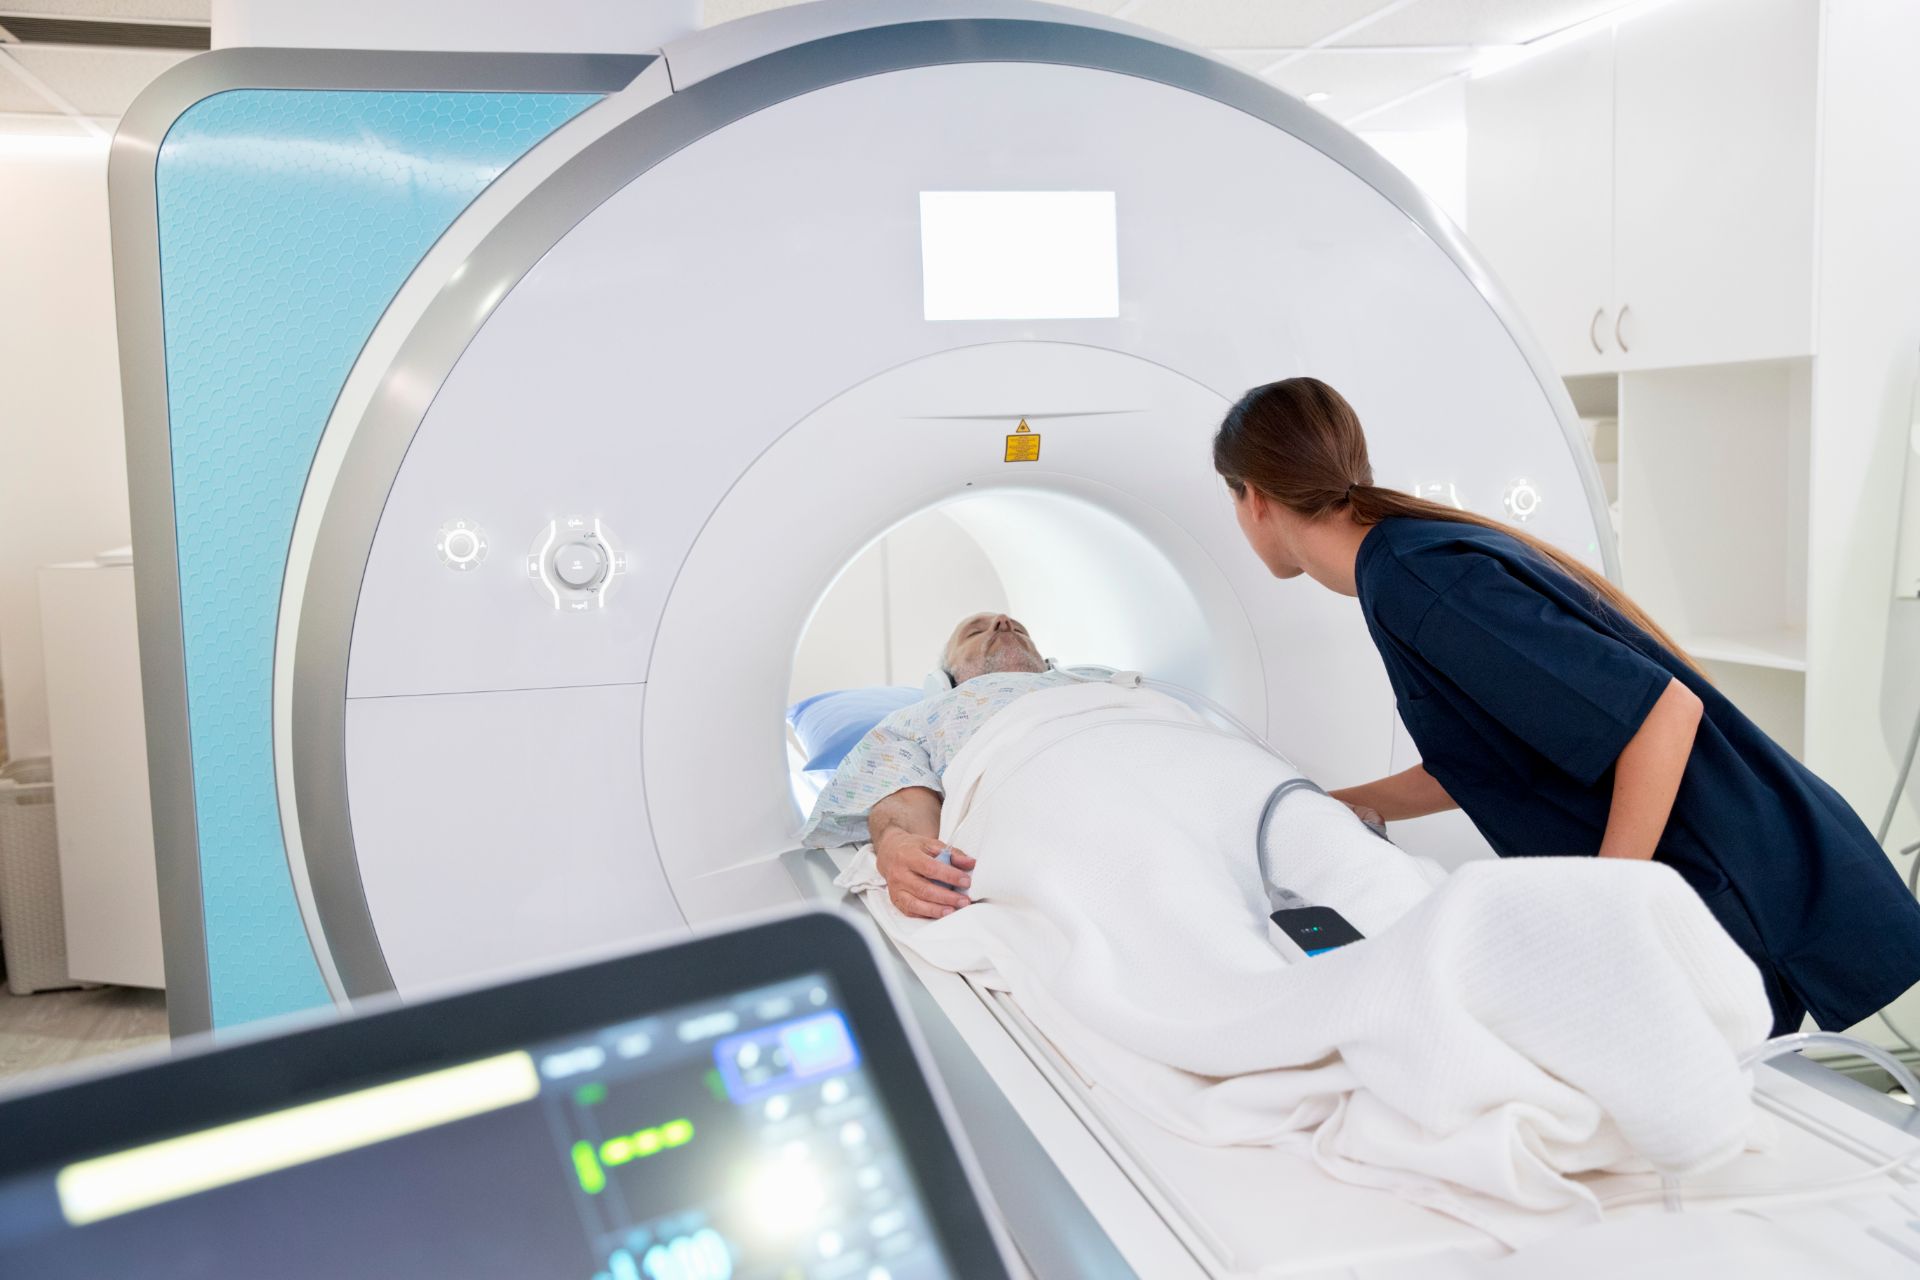 Should you consider a Total Body MRI scan?